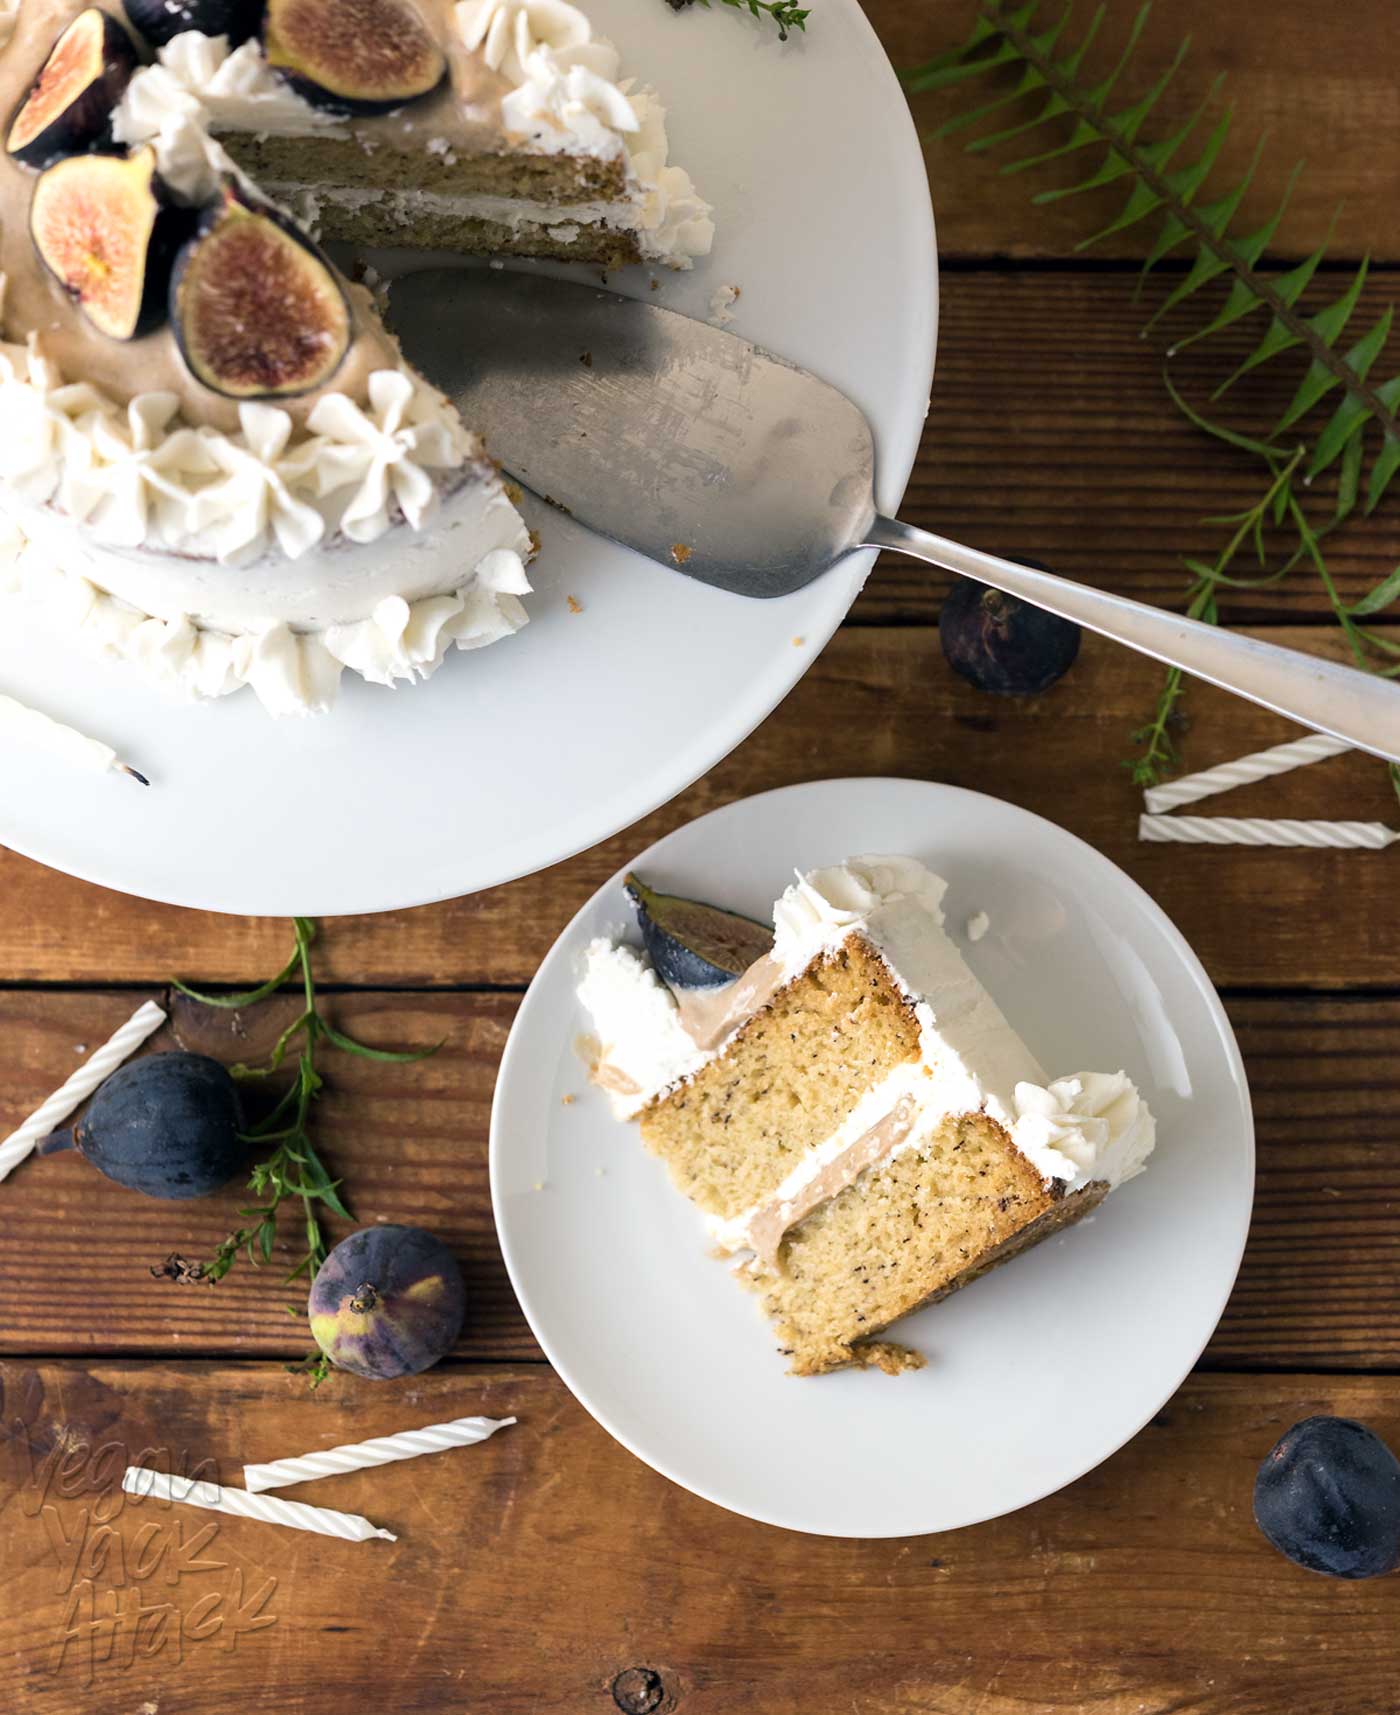 This Caramel Fig Vanilla Layer Cake has gorgeous layers of vegan buttercream, date caramel, and fluffy cake, topped with fresh figs! Soy-free, Dairy-free